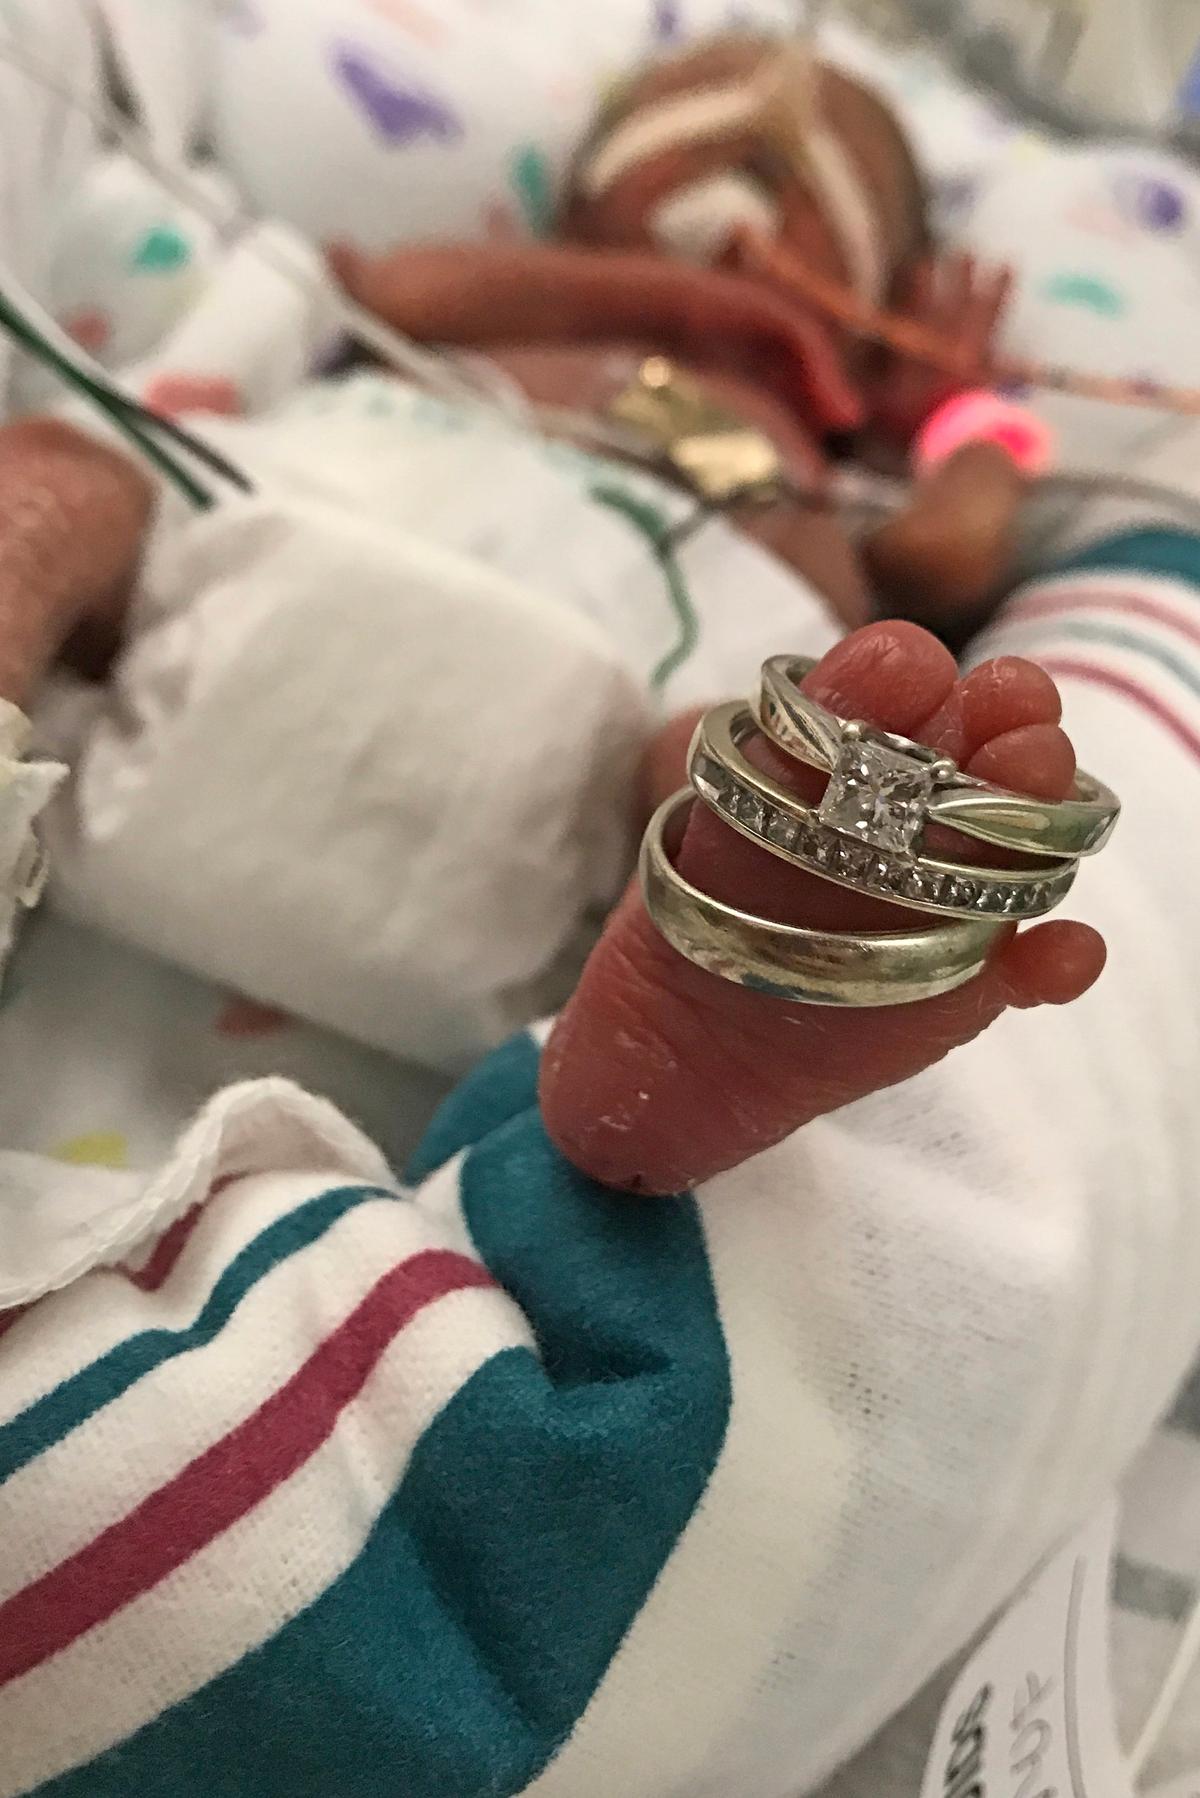 Tiny CJ in the hospital with Mom and Dad's rings around his foot (Caters News)